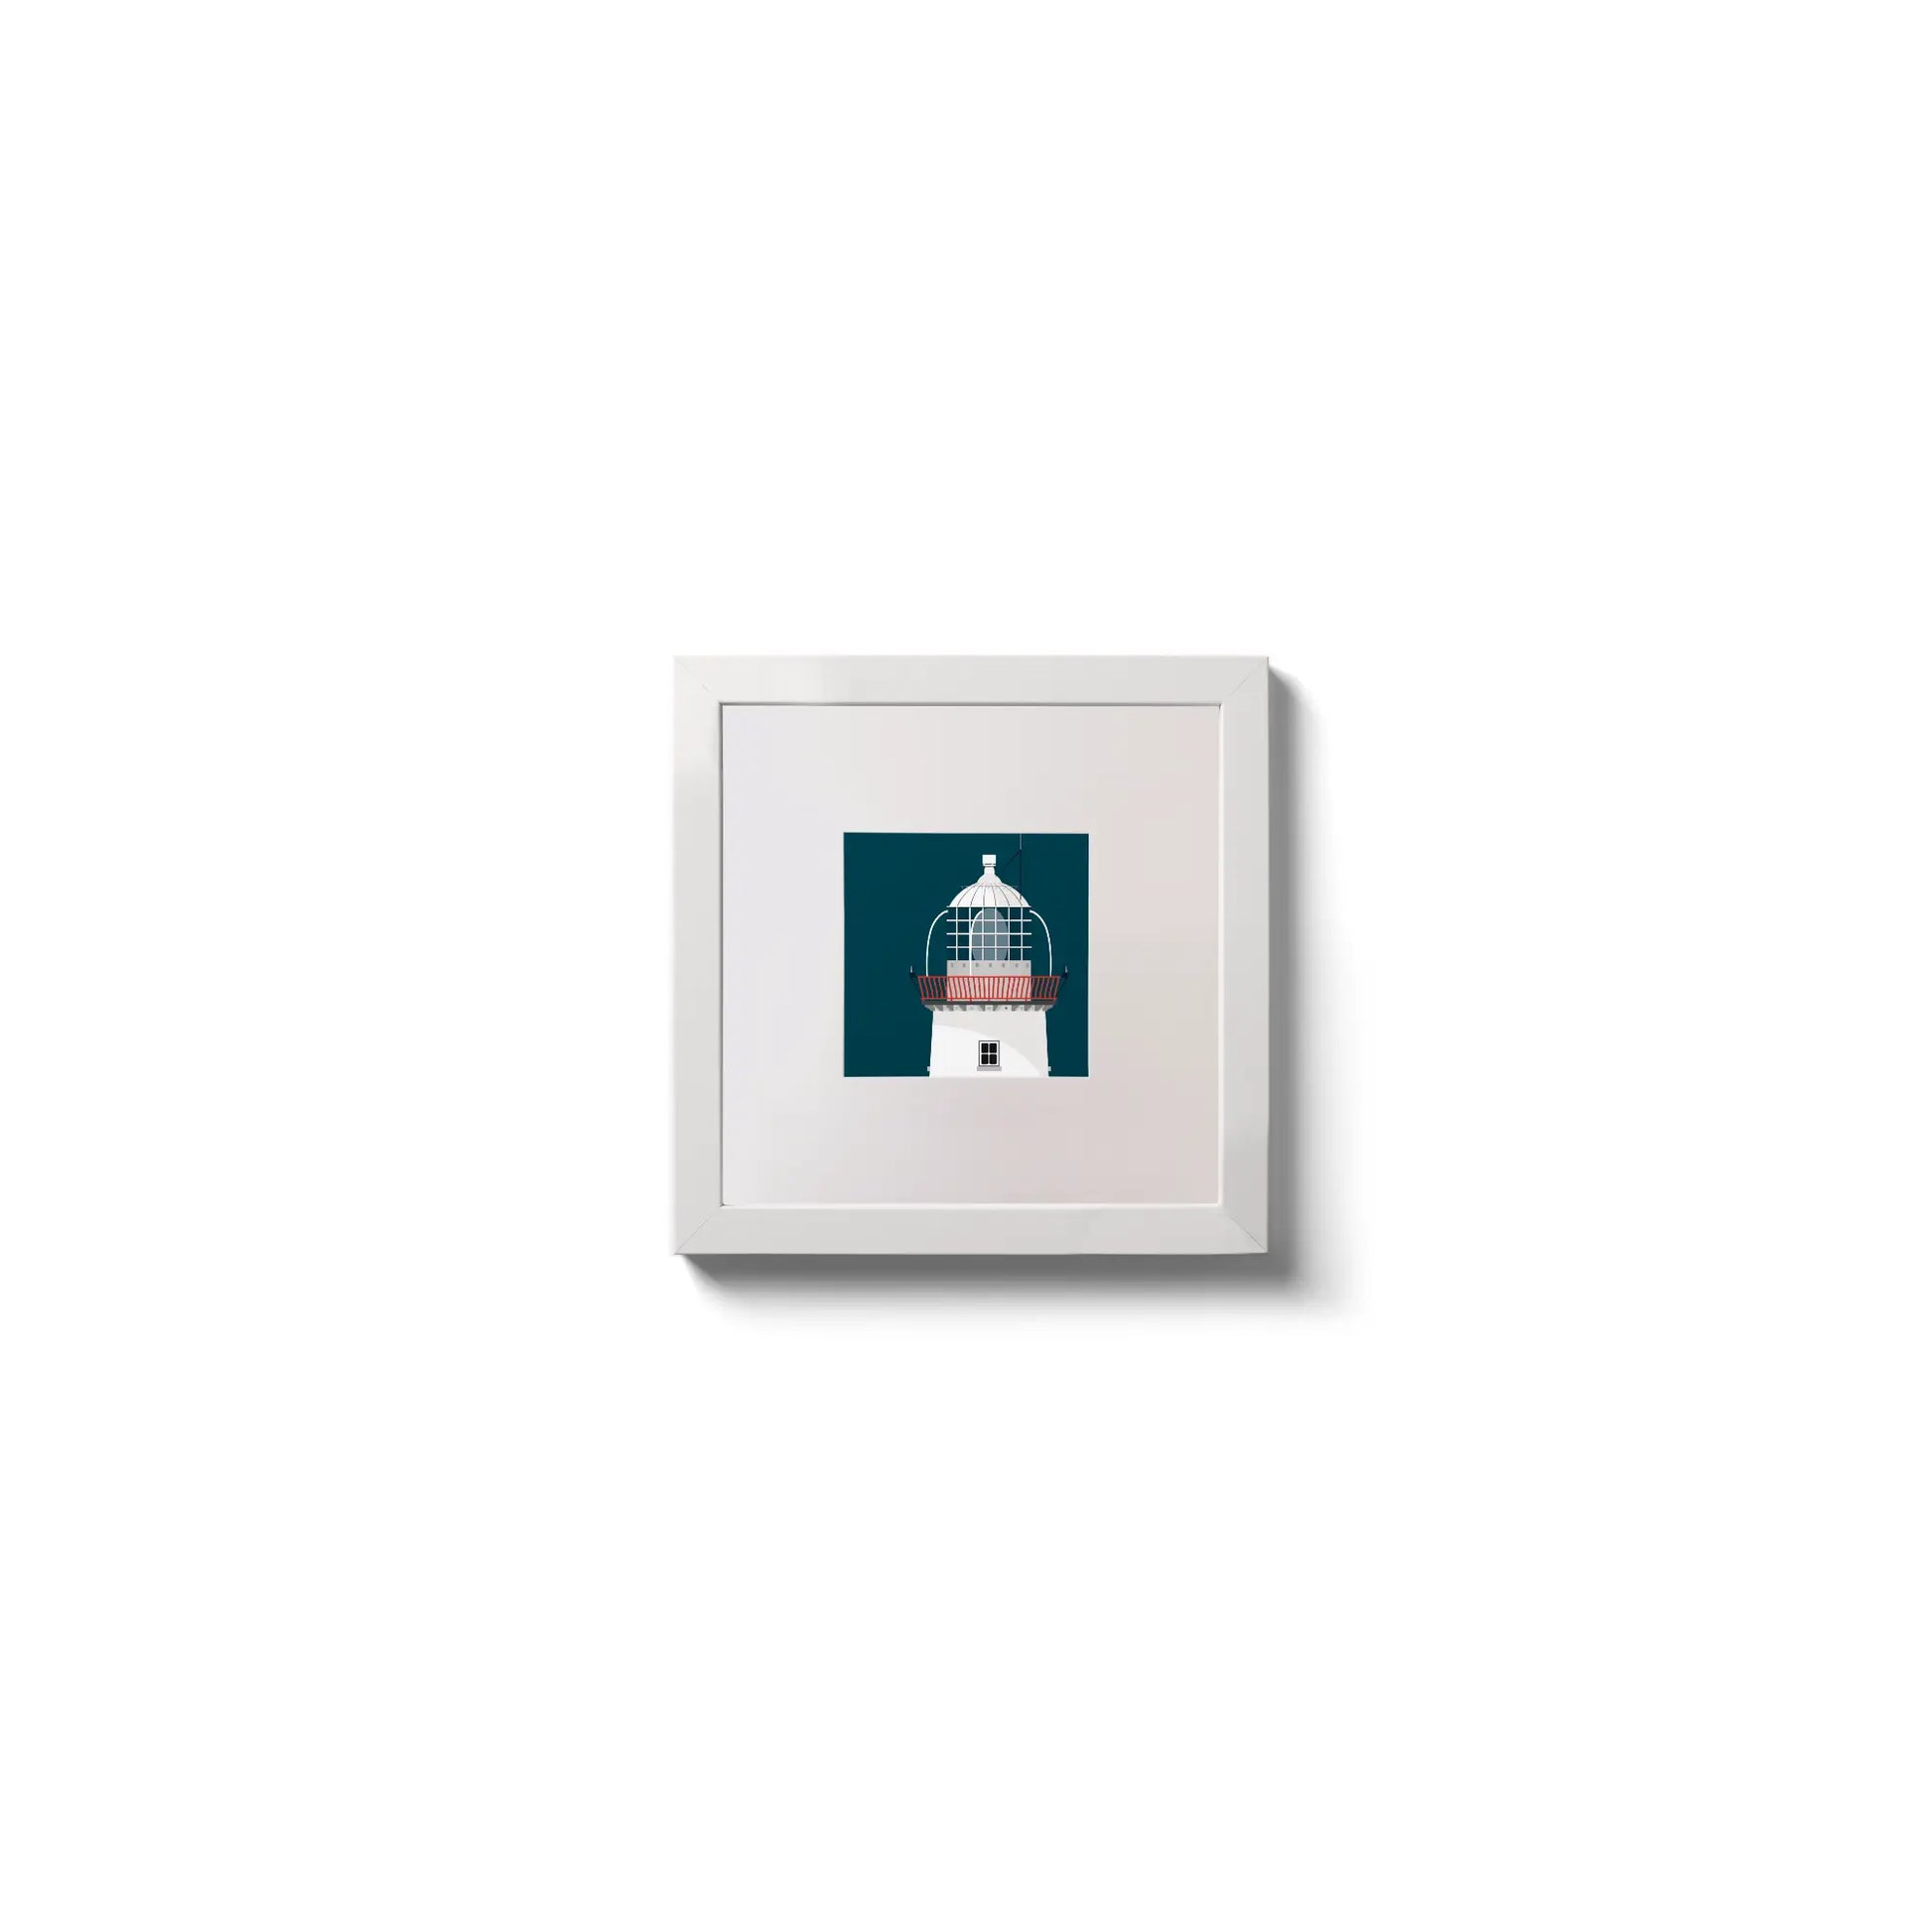 Illustration of St.John's (Donegal) lighthouse on a midnight blue background,  in a white square frame measuring 10x10cm.